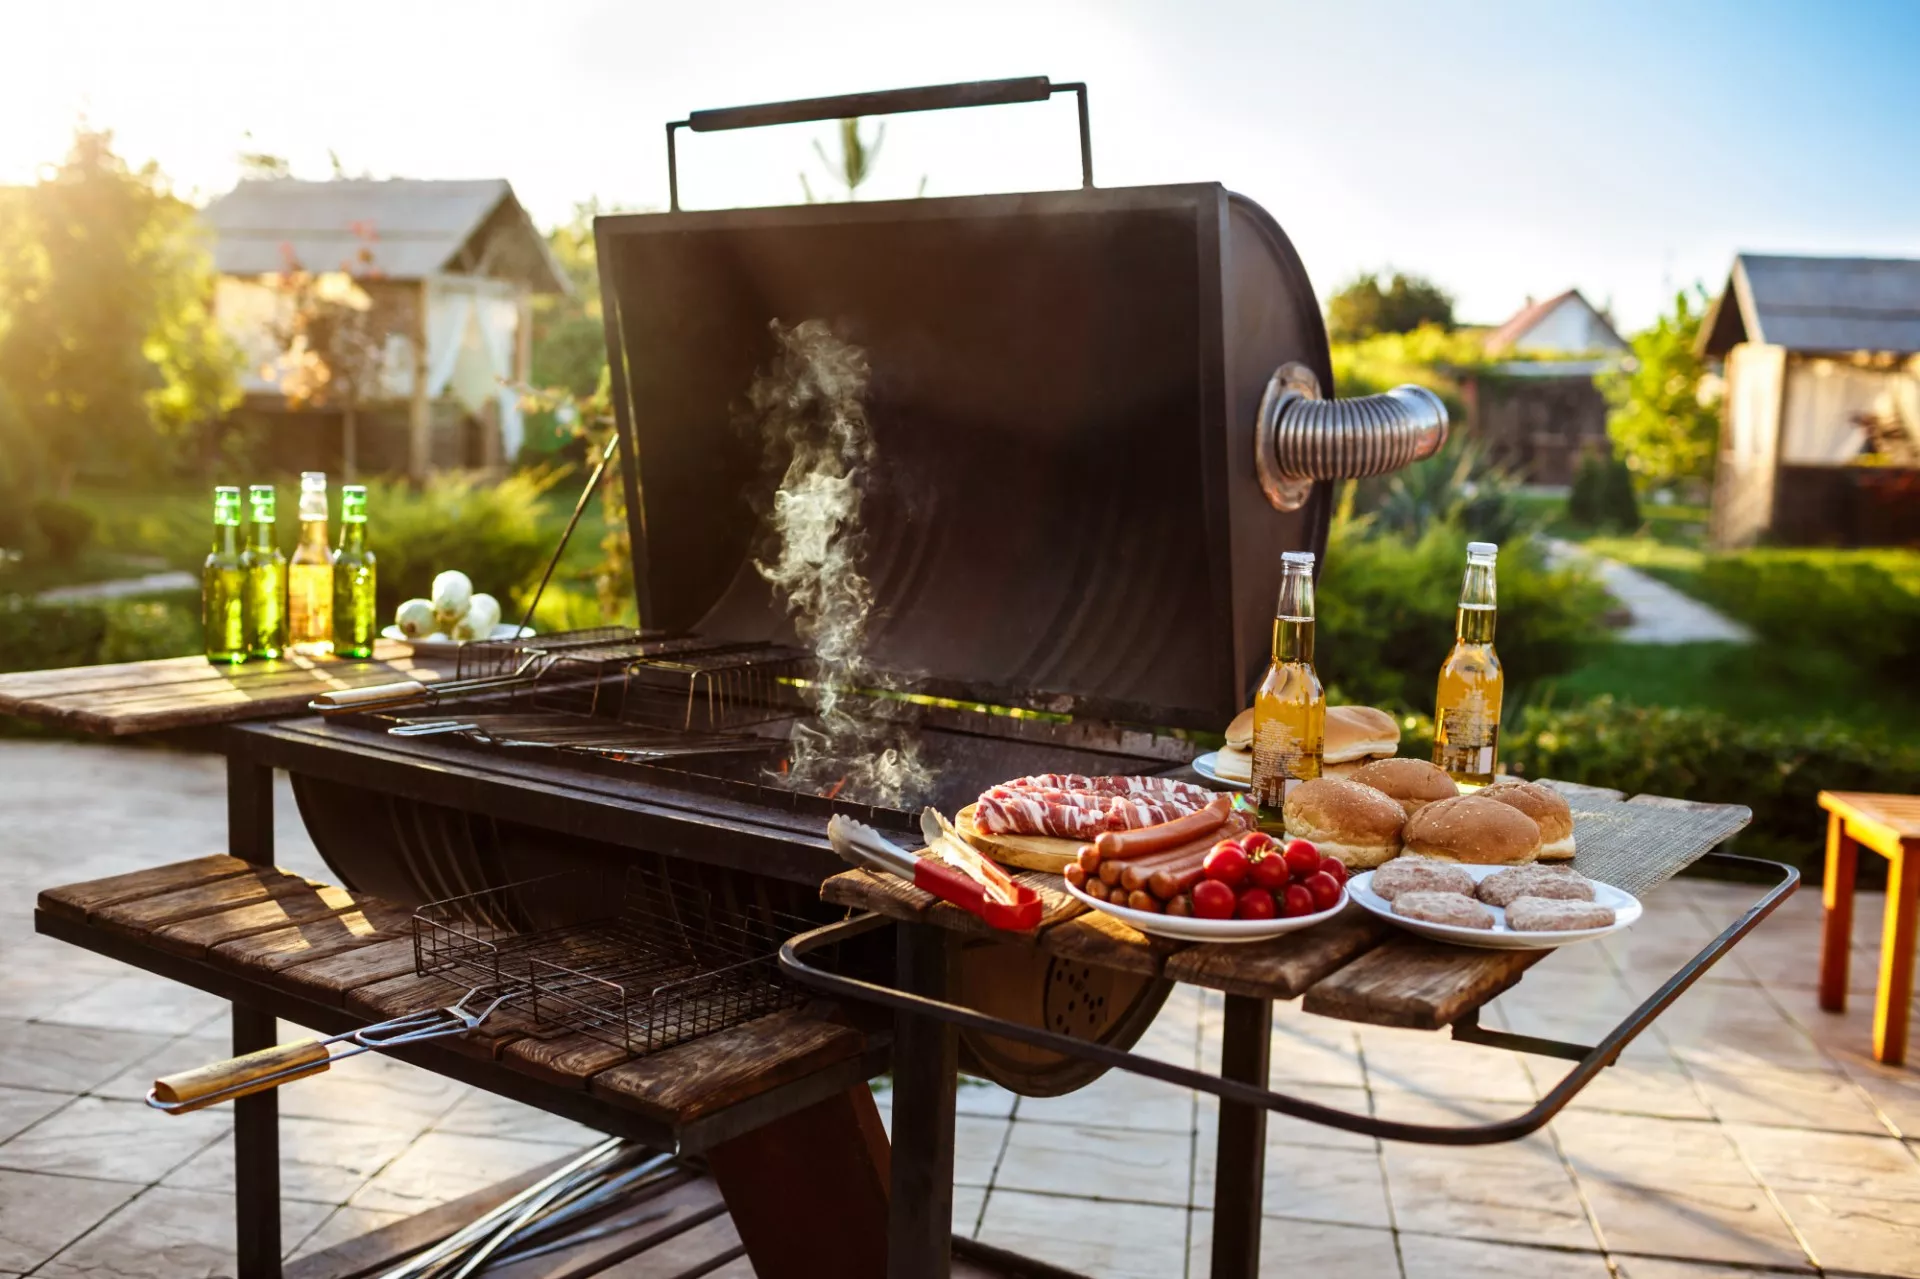 Tips to Ensure the Best BBQ Every Time